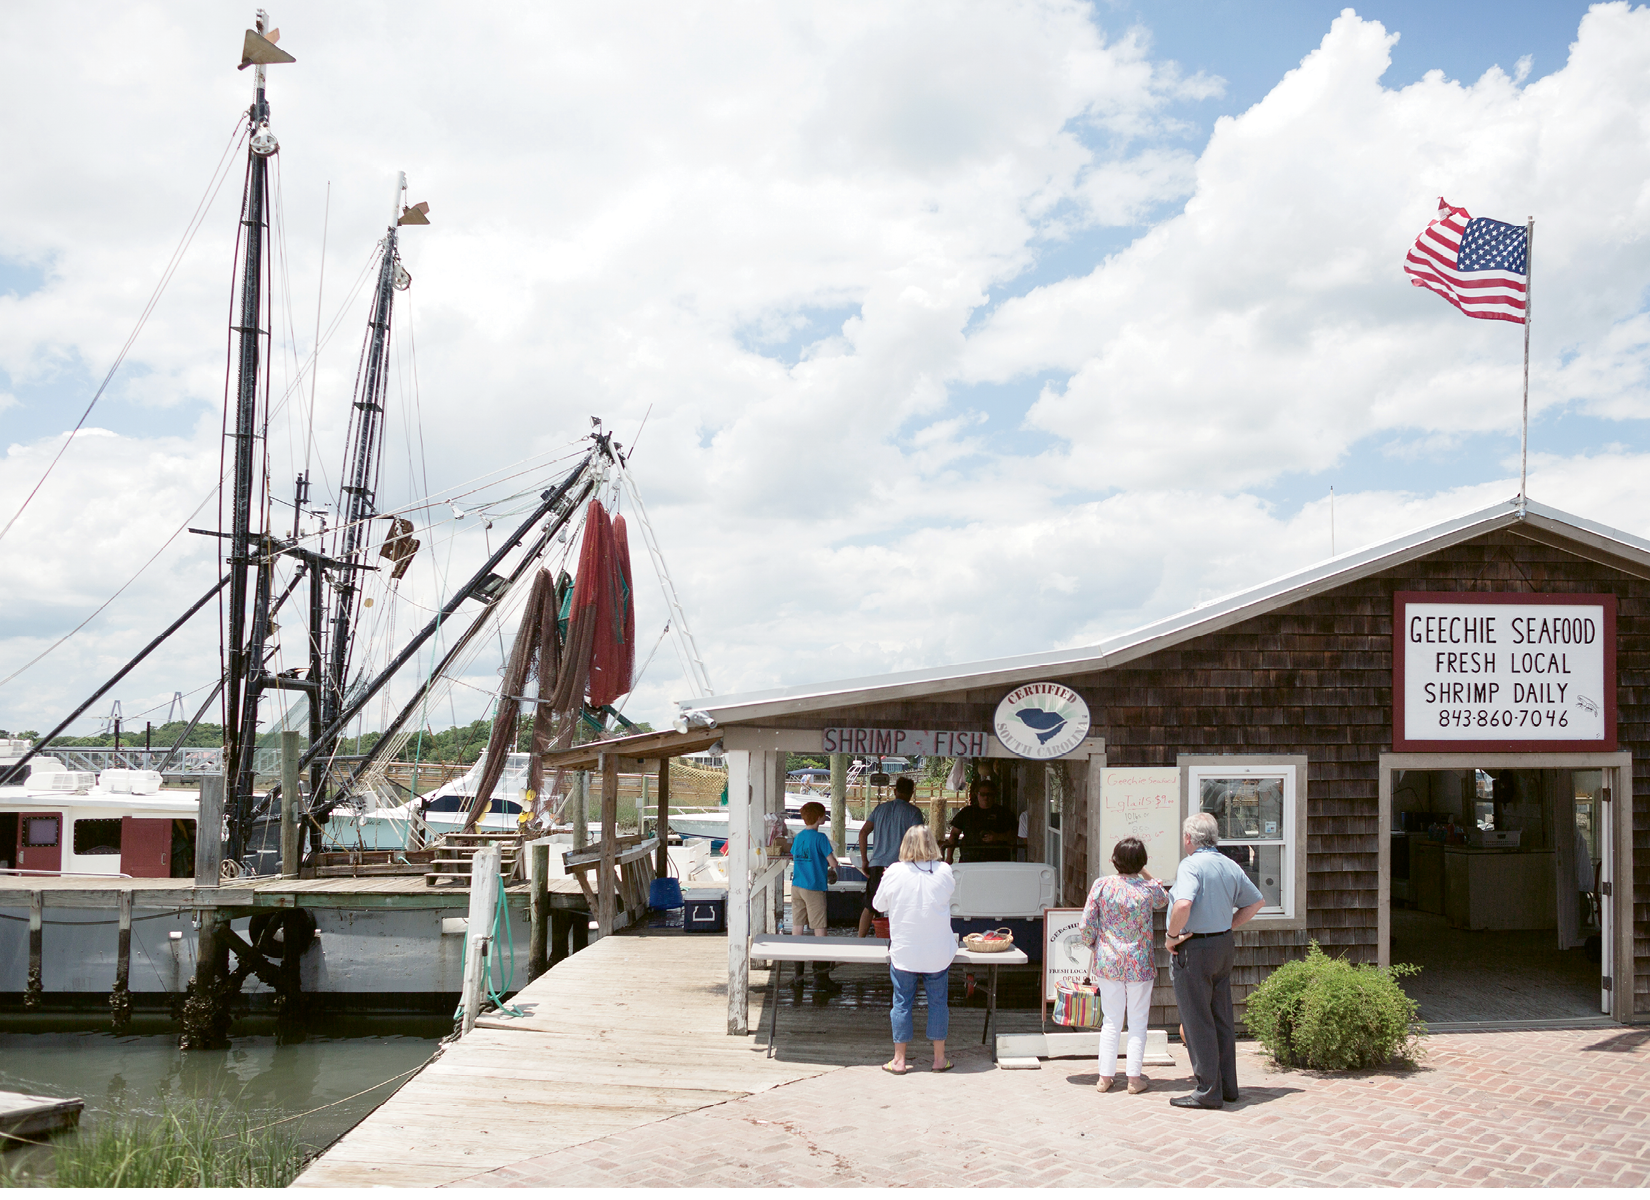 Customers line up at the Rectors’ Geechie Seafood.